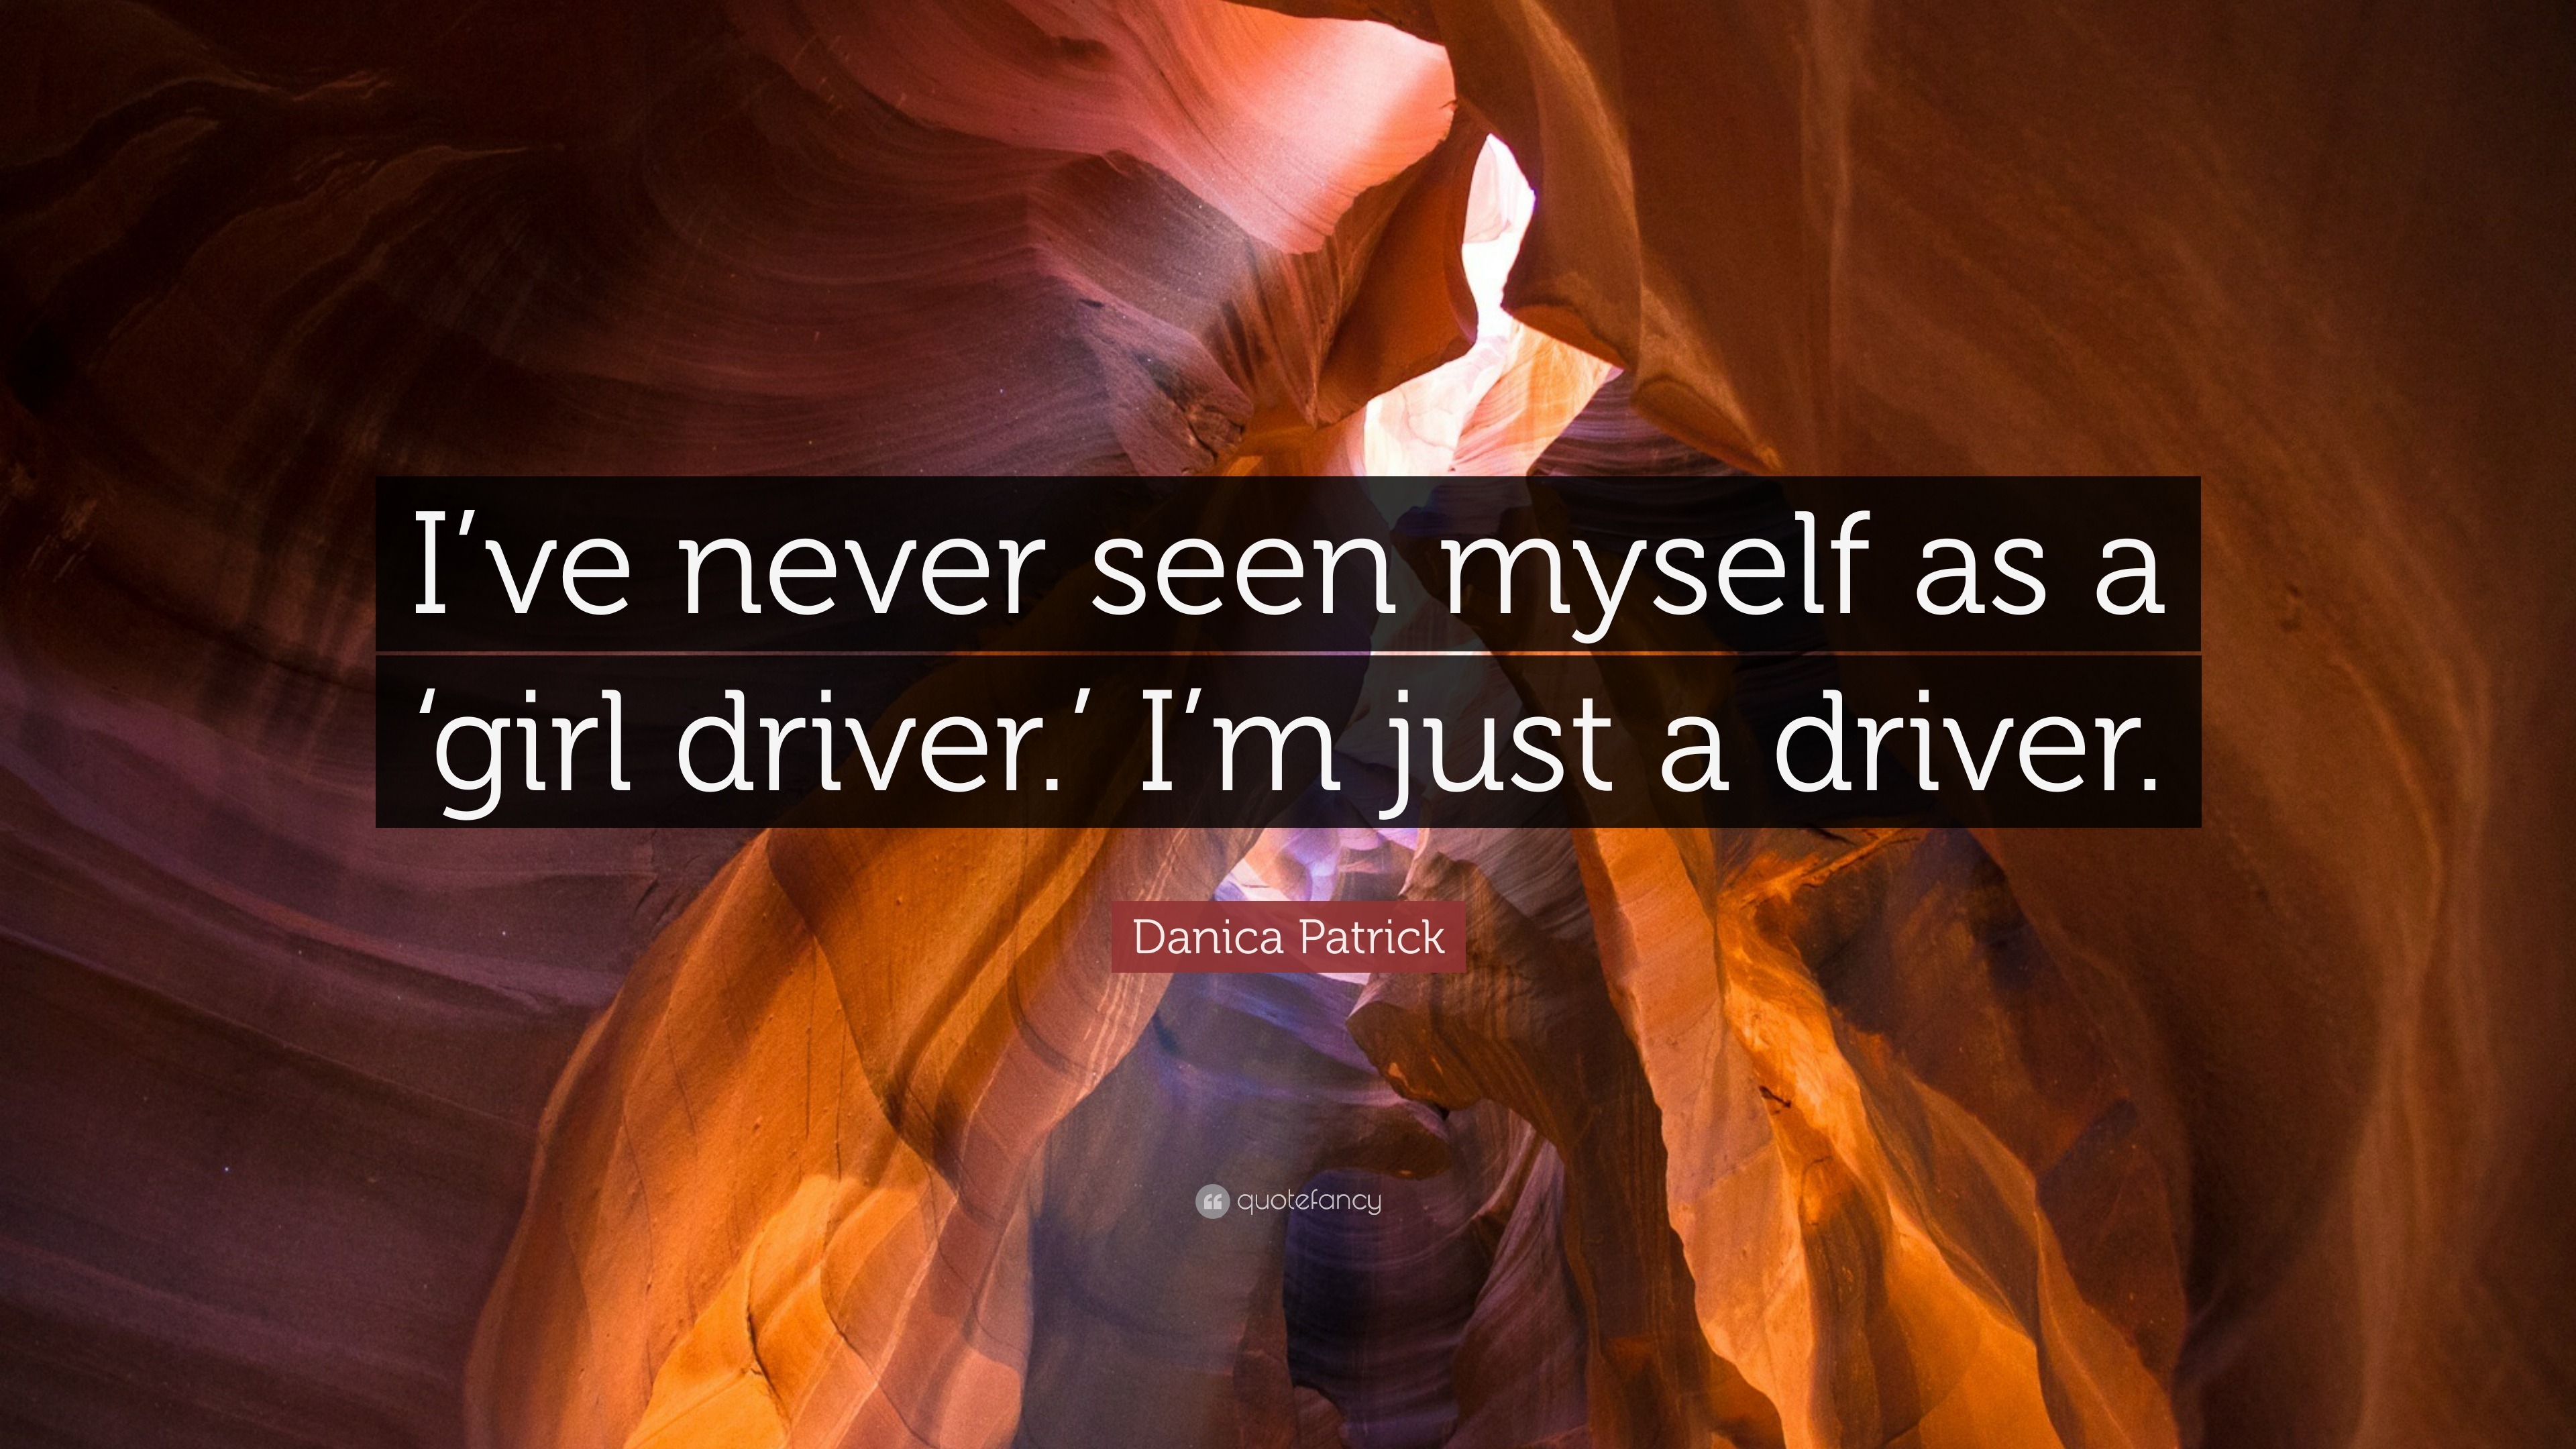 Danica Patrick Quote: “I’ve never seen myself as a ‘girl driver.’ I’m ...